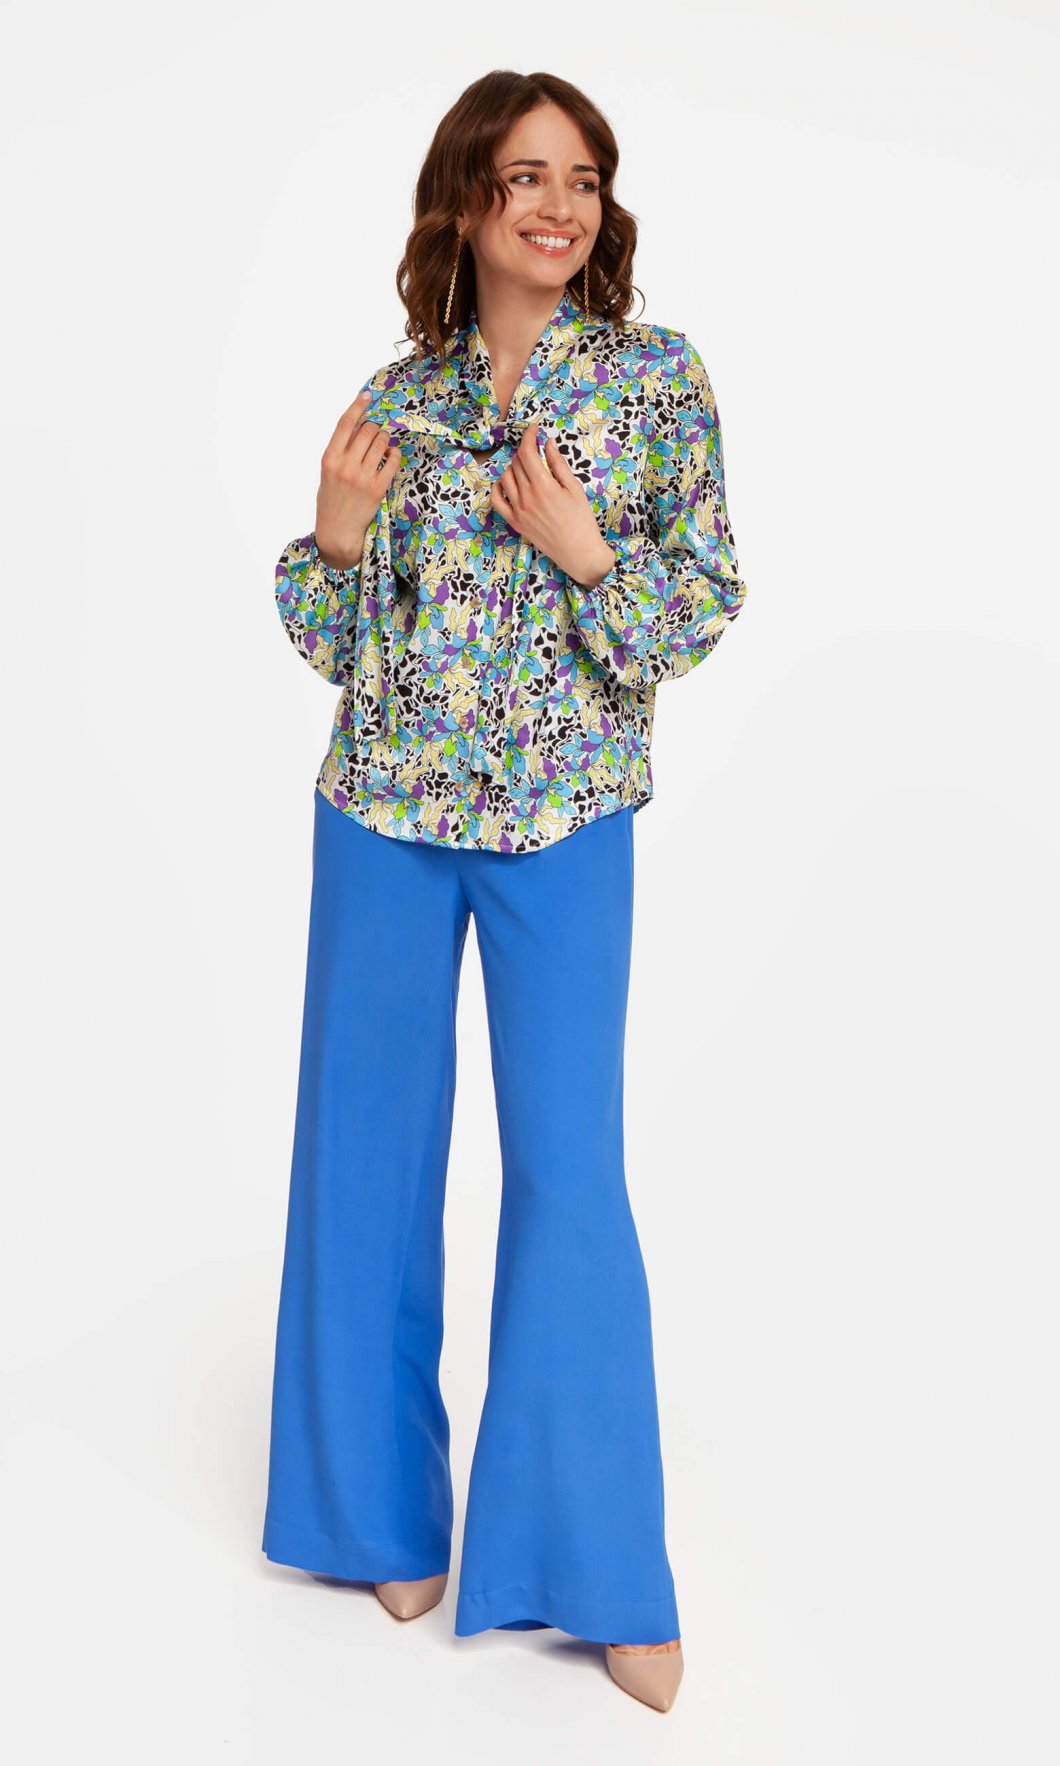 MILENA shirt - with blue accents